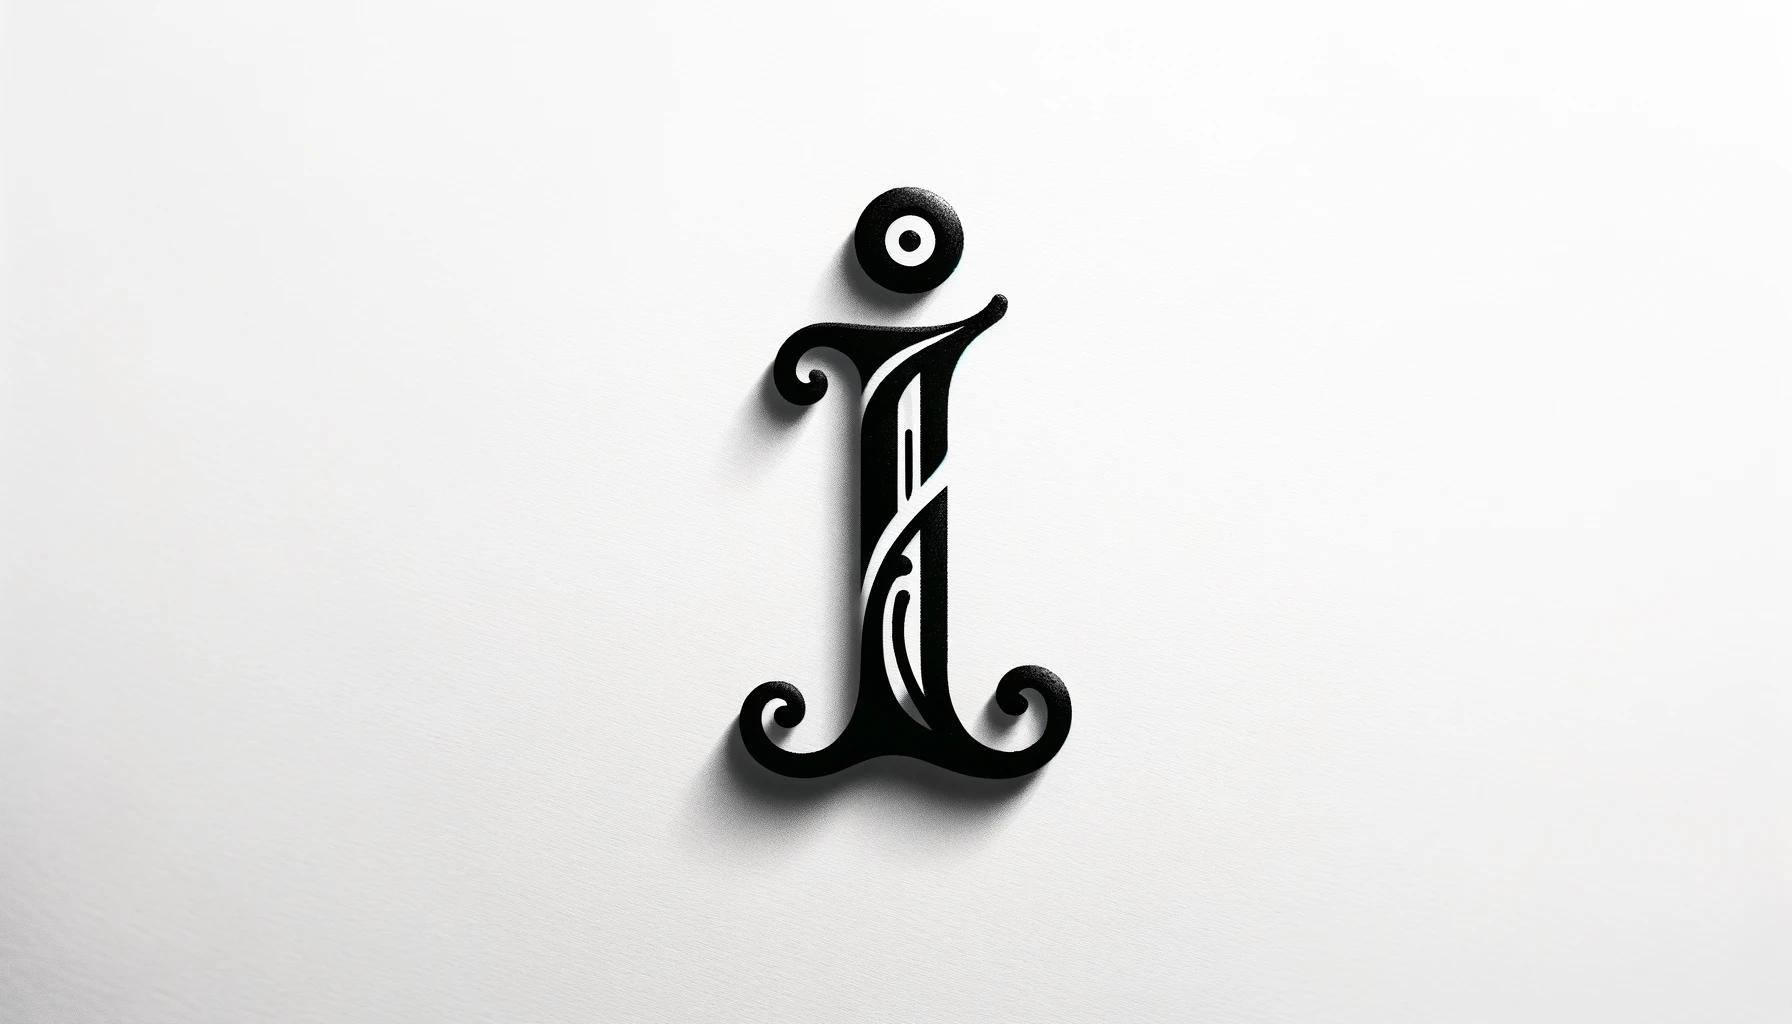 he image depicts a small letter 'i' in an imaginative, fancy font, designed in black against a white background.